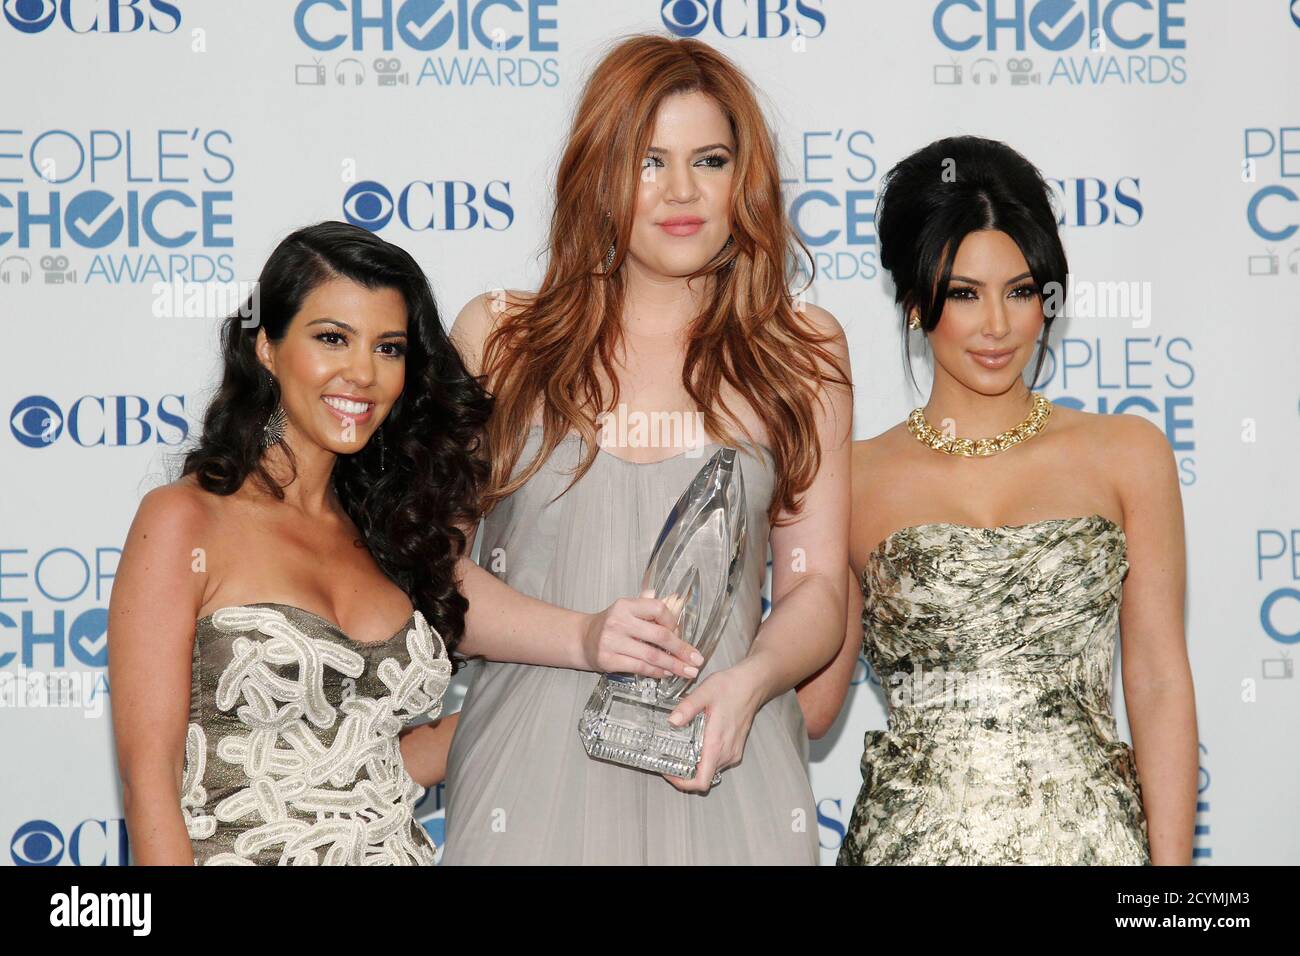 Reality television sisters (L-R) Kourtney, Khloe and Kim Kardashian pose with their favorite guilty pleasure award for 'Keeping Up with the Kardashians' at the 2011 People's Choice Awards in Los Angeles January 5, 2011  REUTERS/Danny Moloshok   (UNITED STATES) (PEOPLESCHOICE -BACKSTAGE - Tags: ENTERTAINMENT) Stock Photo